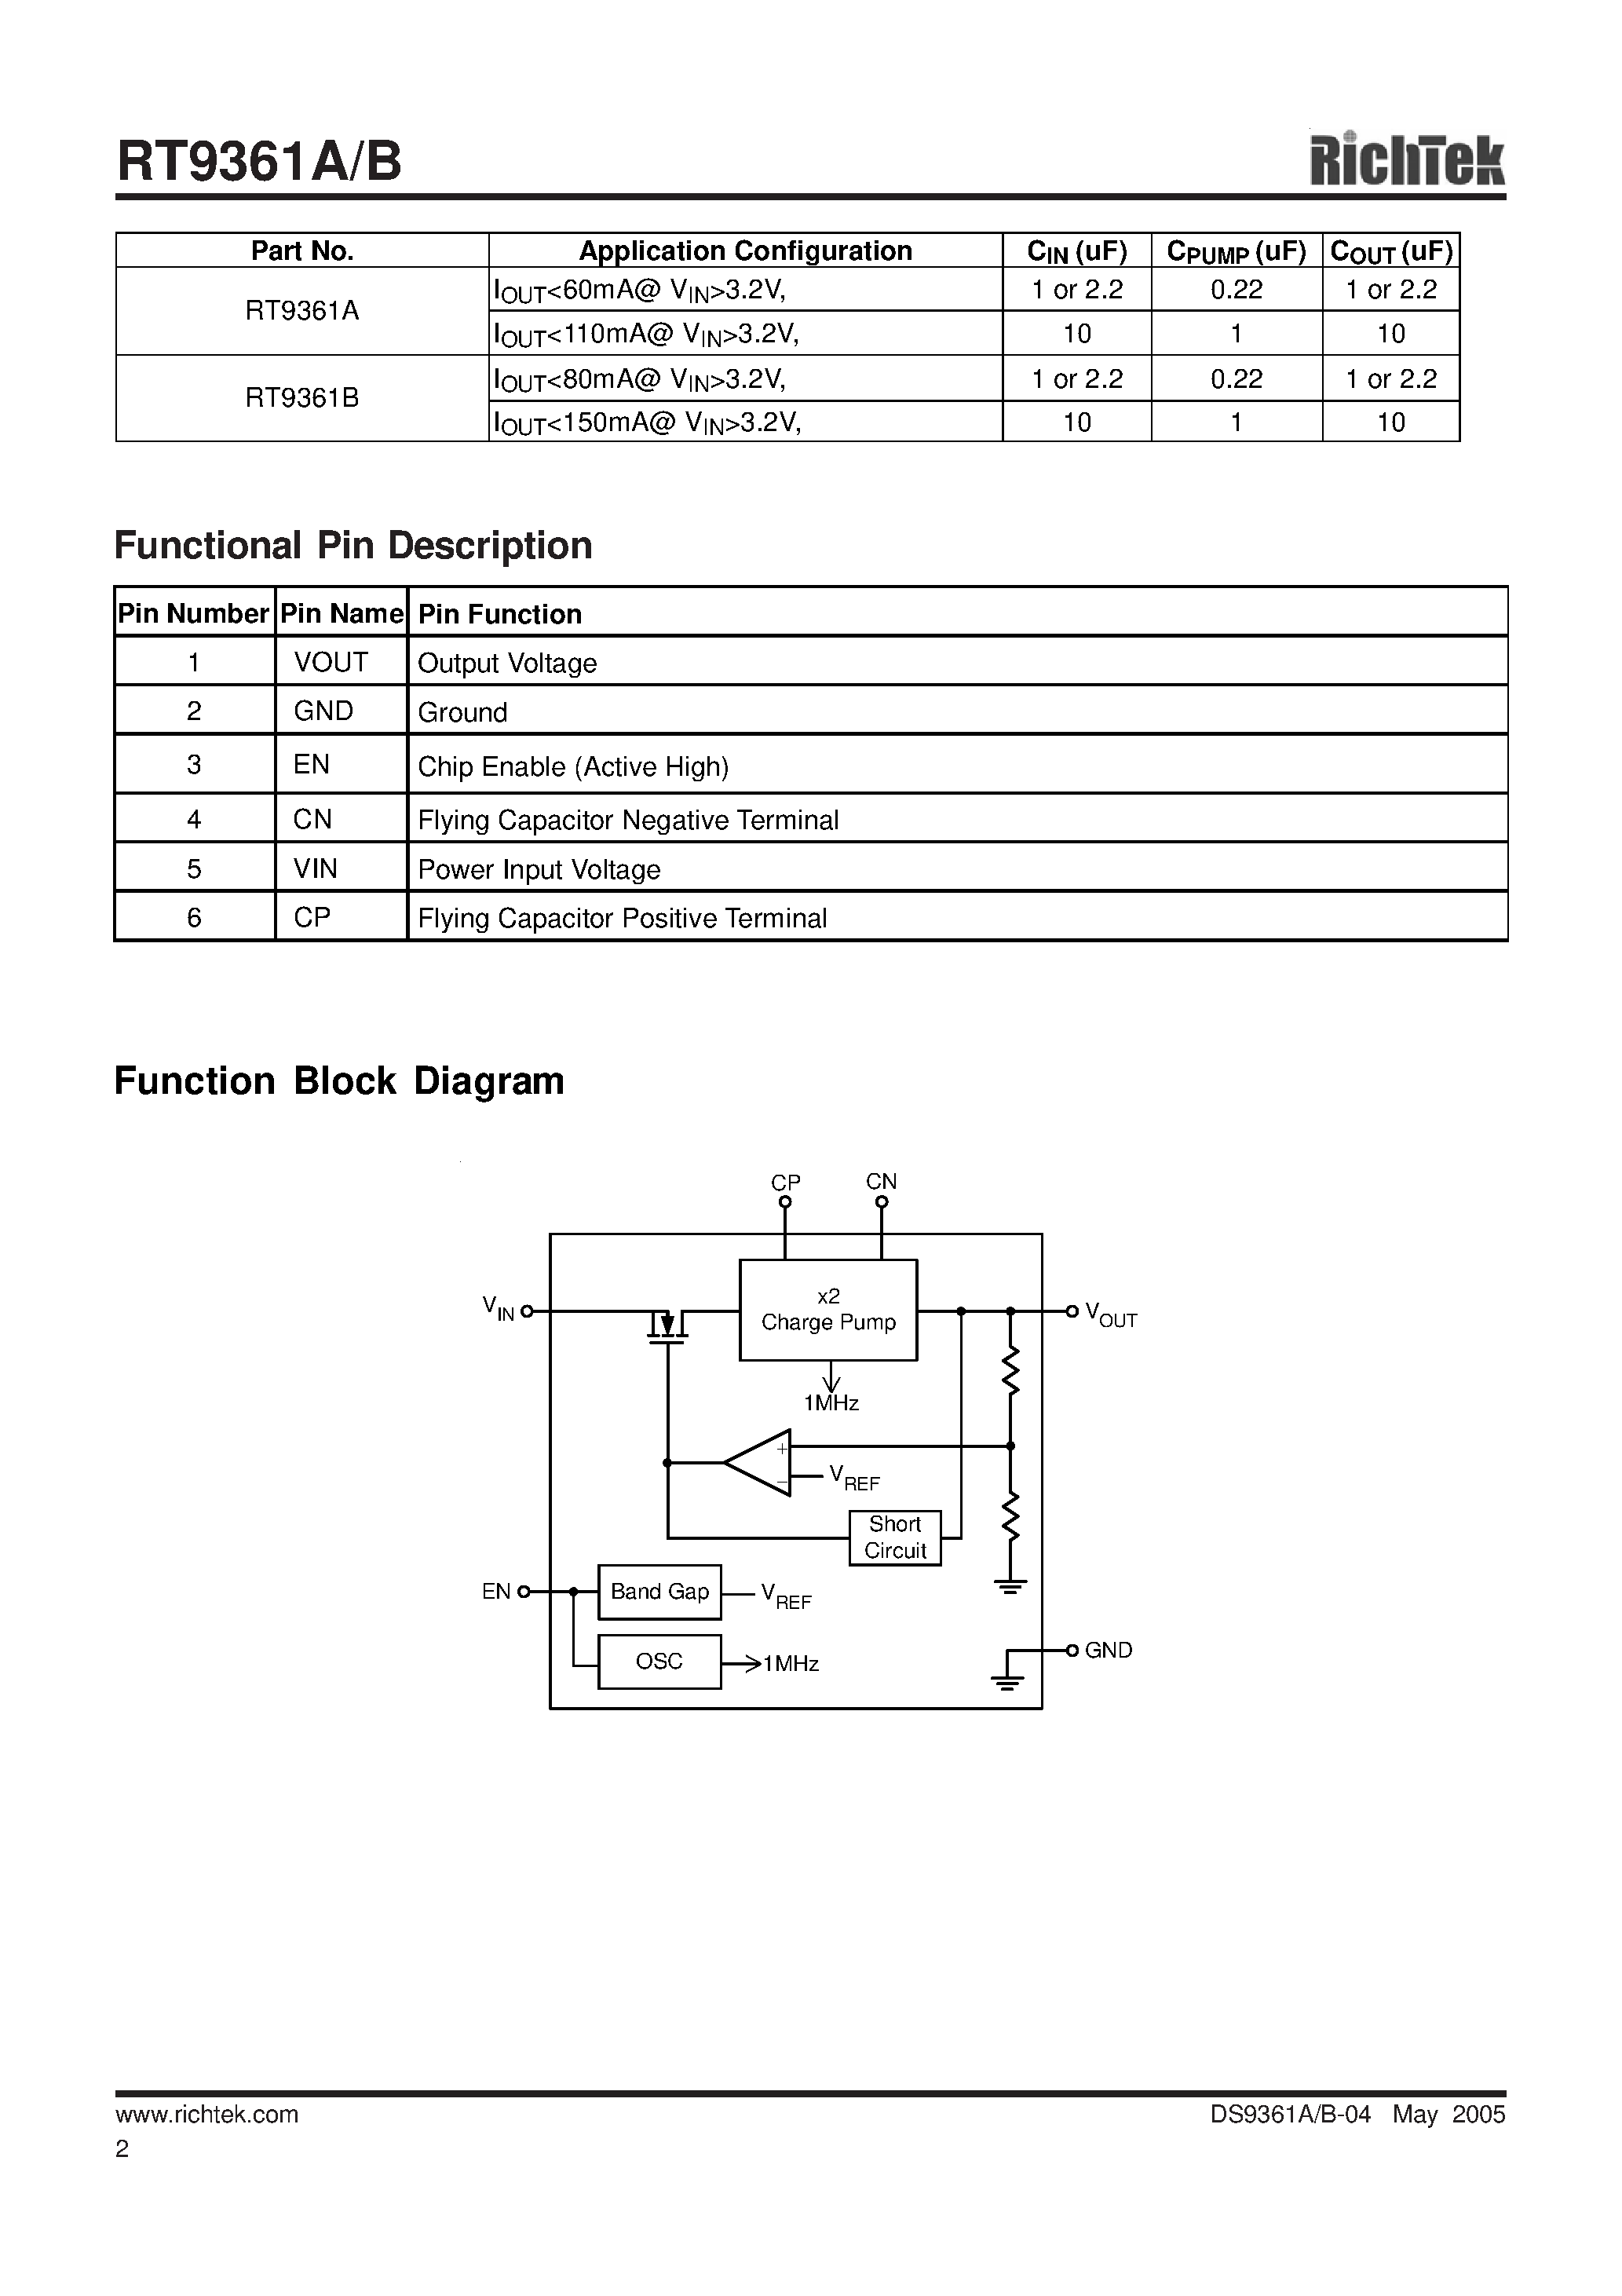 Datasheet RT9361A - (RT9361A/B) Tiny Package / High Performance / Regulated Chard Pump page 2